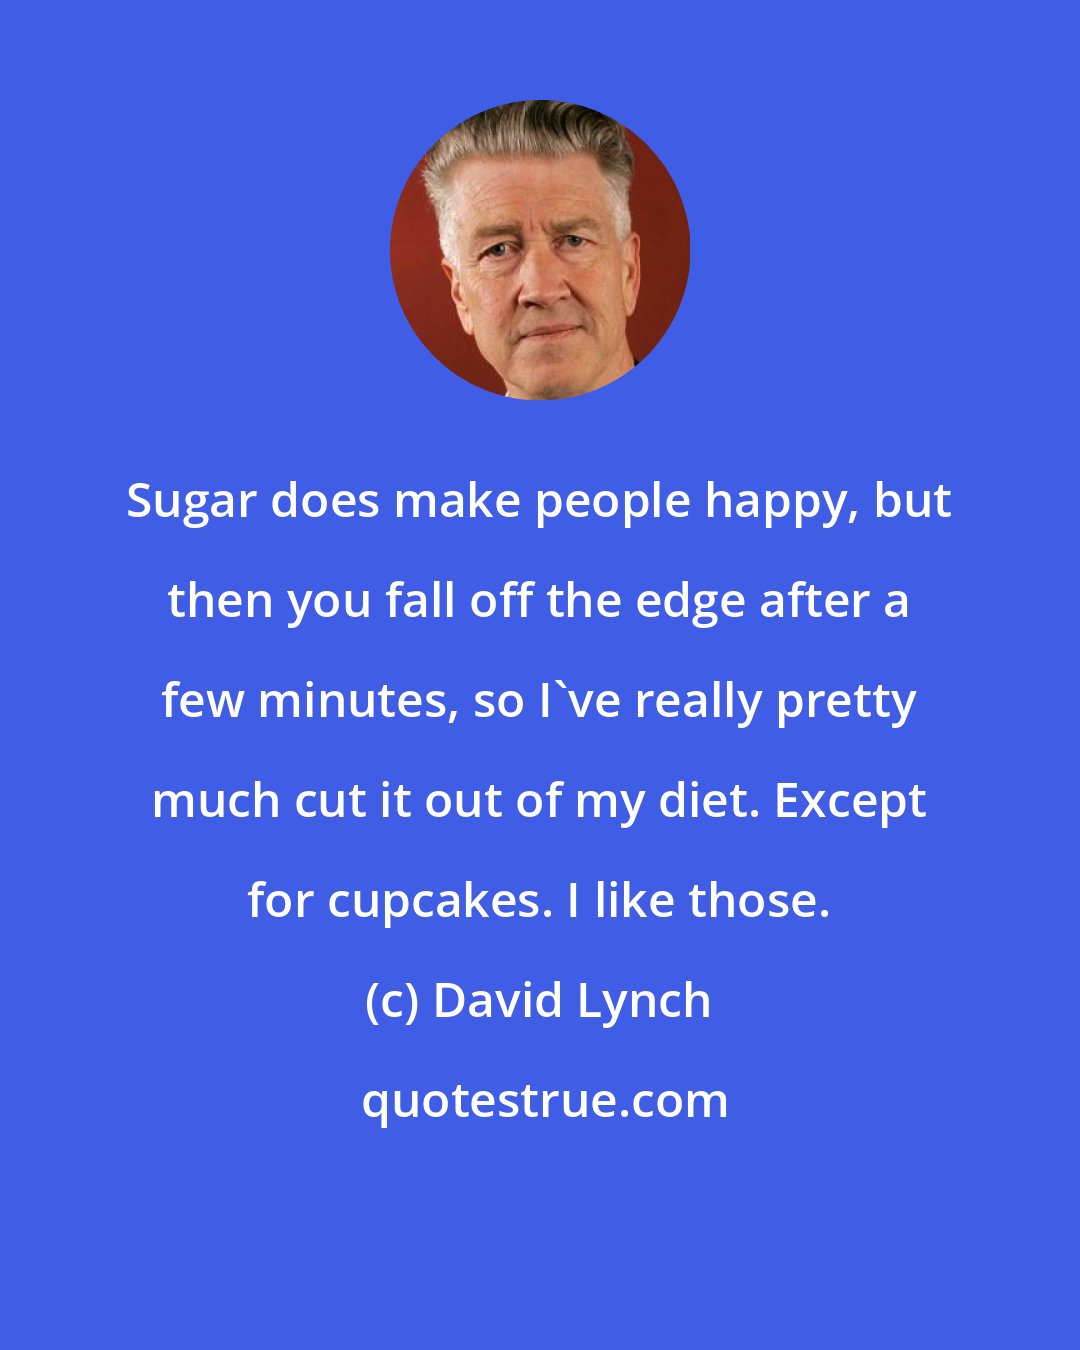 David Lynch: Sugar does make people happy, but then you fall off the edge after a few minutes, so I've really pretty much cut it out of my diet. Except for cupcakes. I like those.